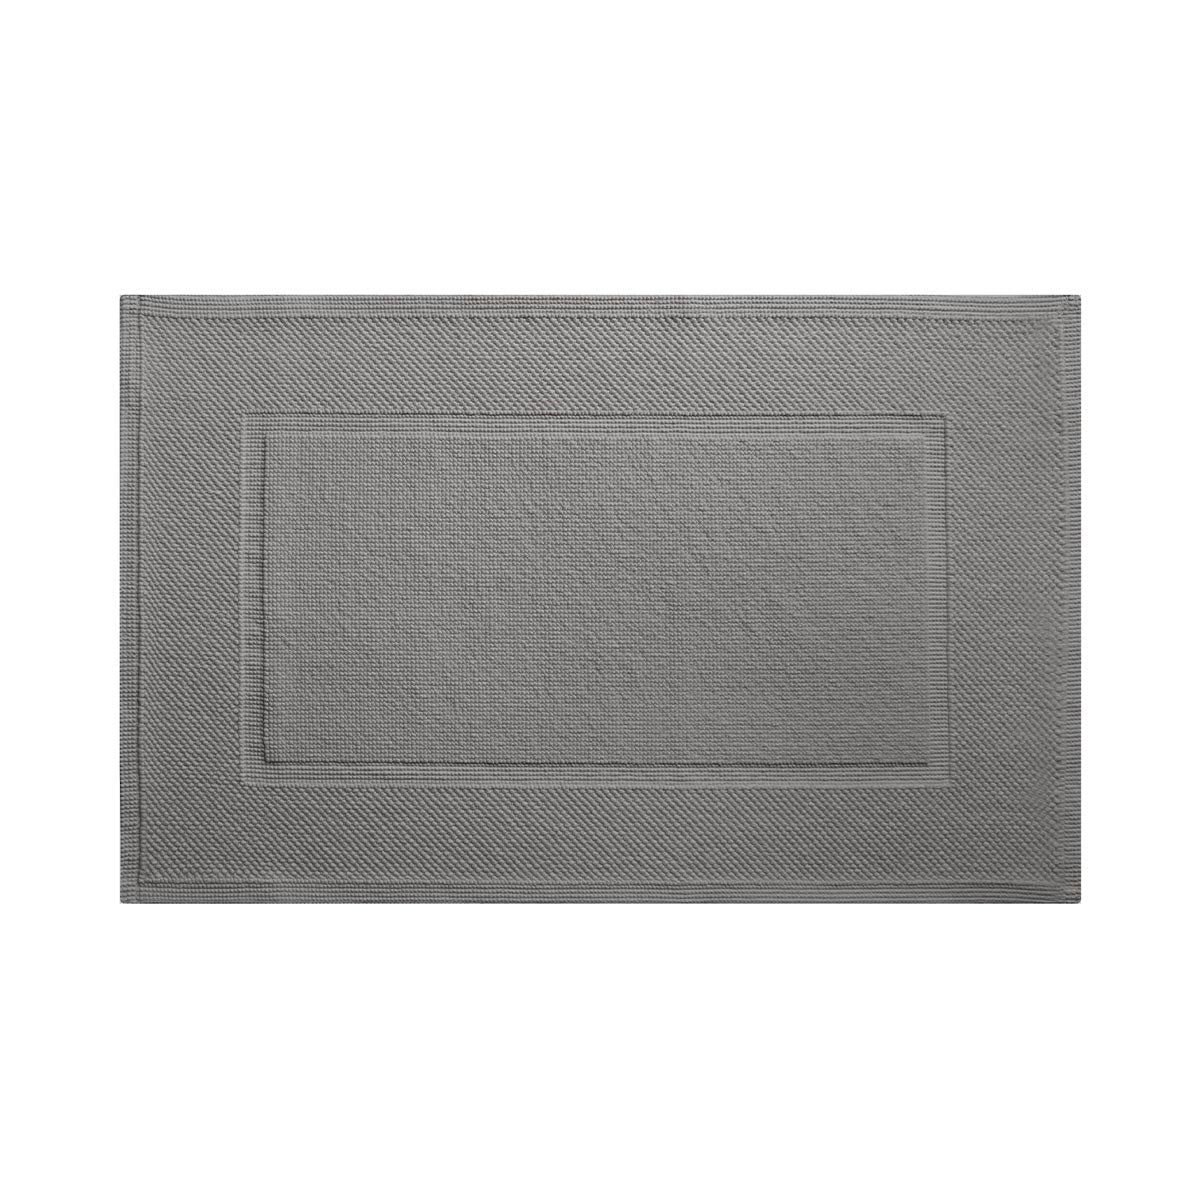 Eden Platine Bath Mat by Yves Delorme | Fig Linens and Home - gray bath mat, rug